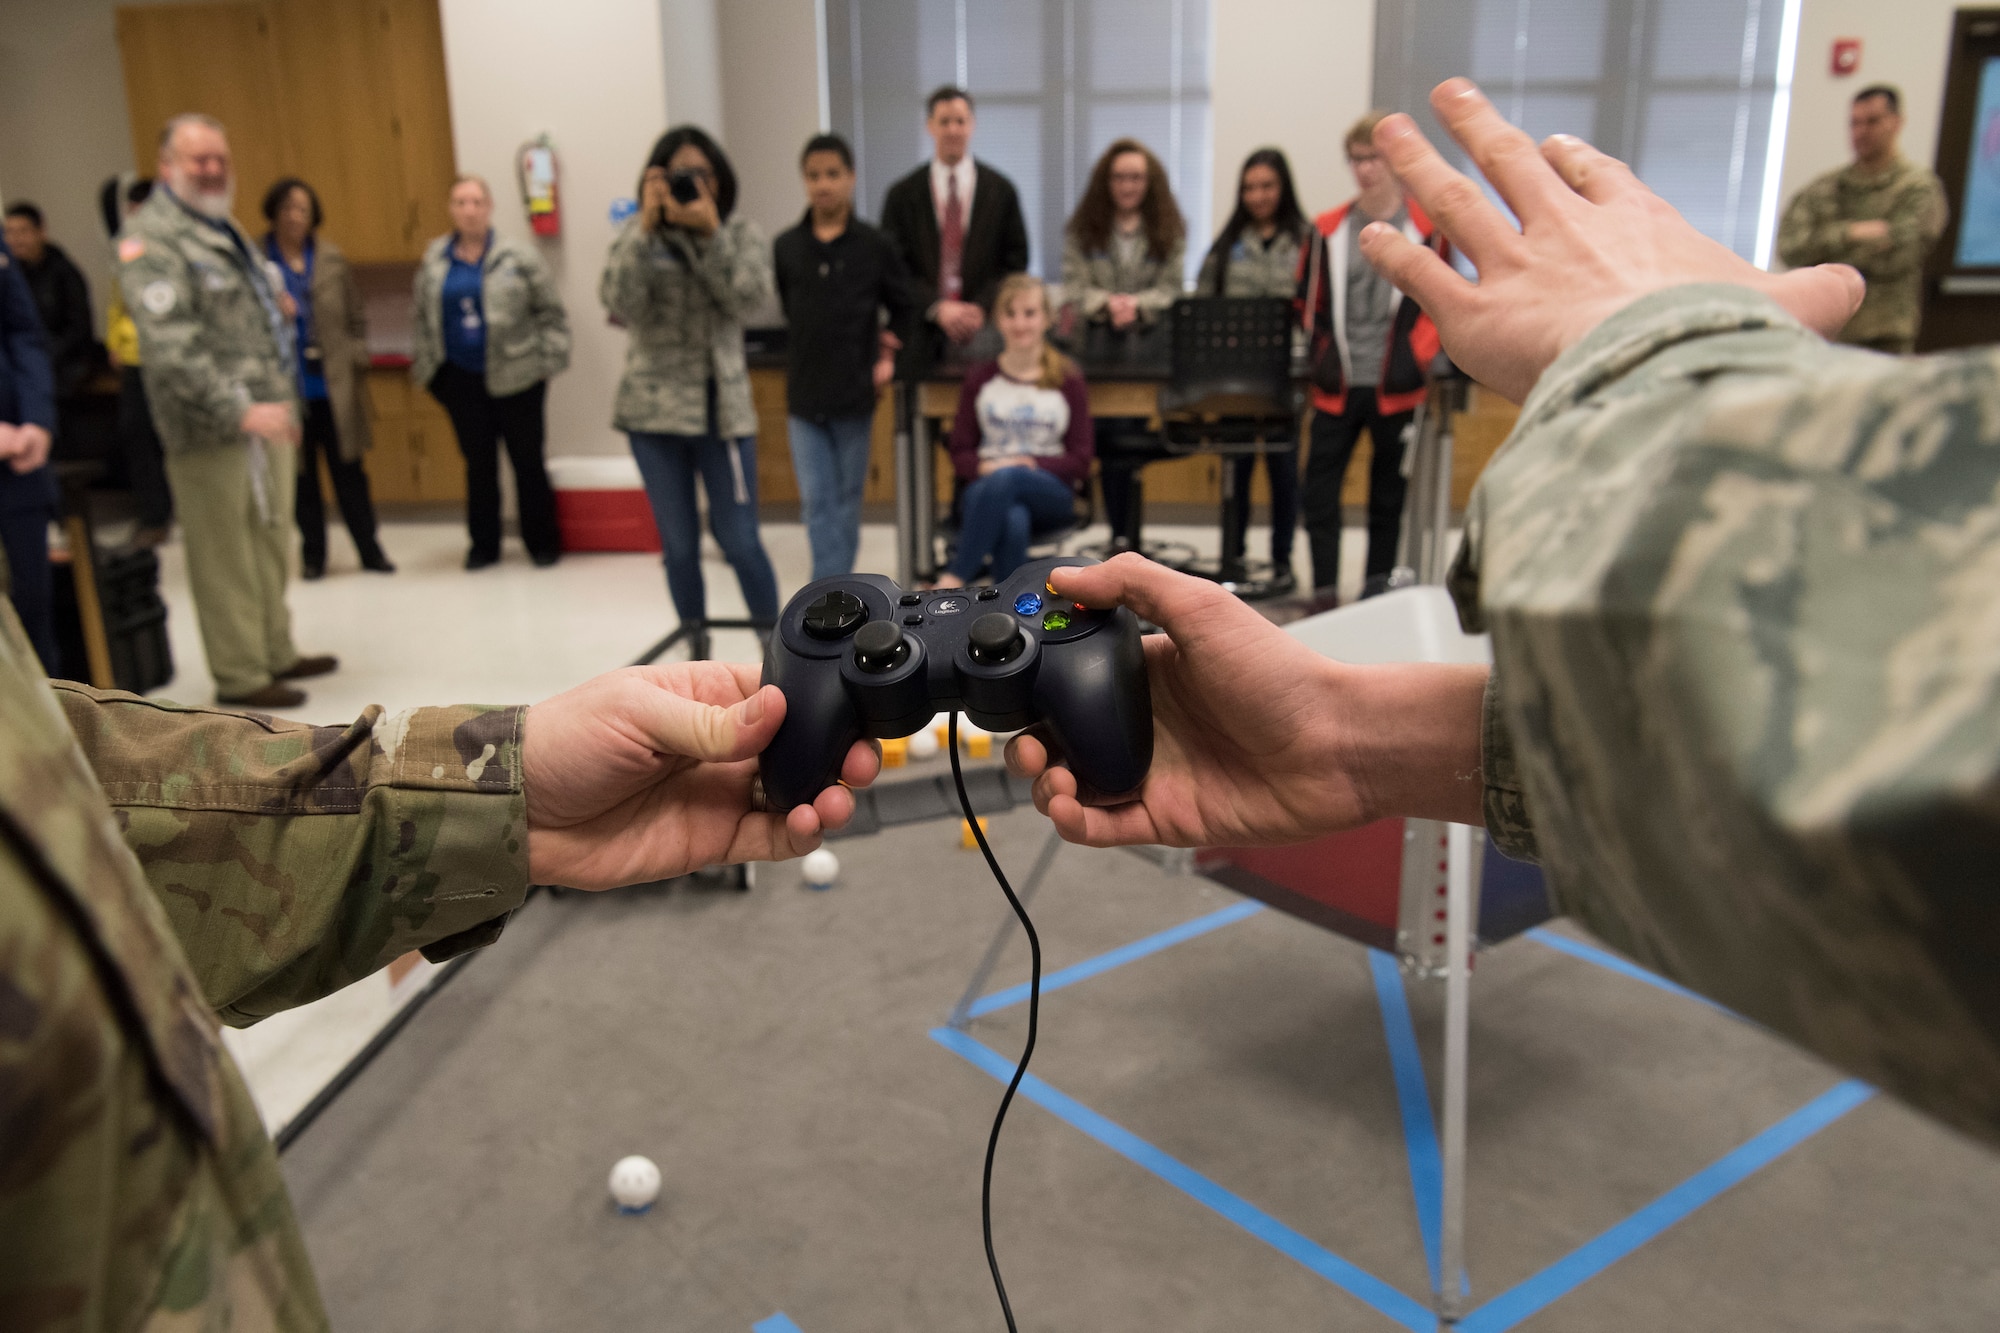 A Bots in Blue club member shows Col. Robert W. Trayers Jr., Air Force Recruiting Service vice commander, how to drive their robot during a visit to Virginia Allred Stacey Junior/Senior High School Feb. 13, 2019, at Joint Base San Antonio-Lackland, Texas.